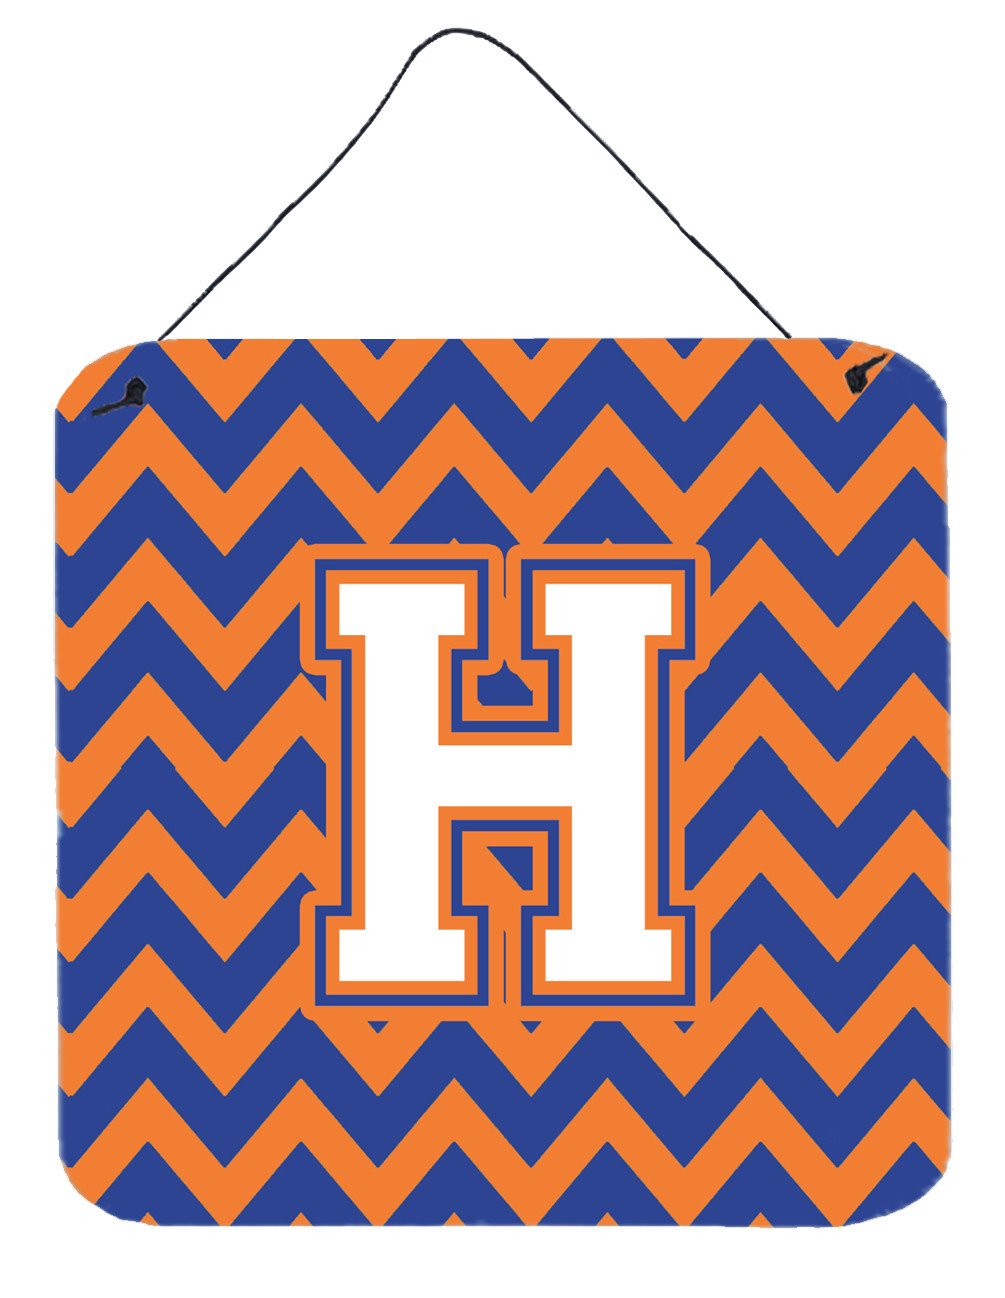 Letter H Chevron Blue and Orange #3 Wall or Door Hanging Prints CJ1060-HDS66 by Caroline's Treasures